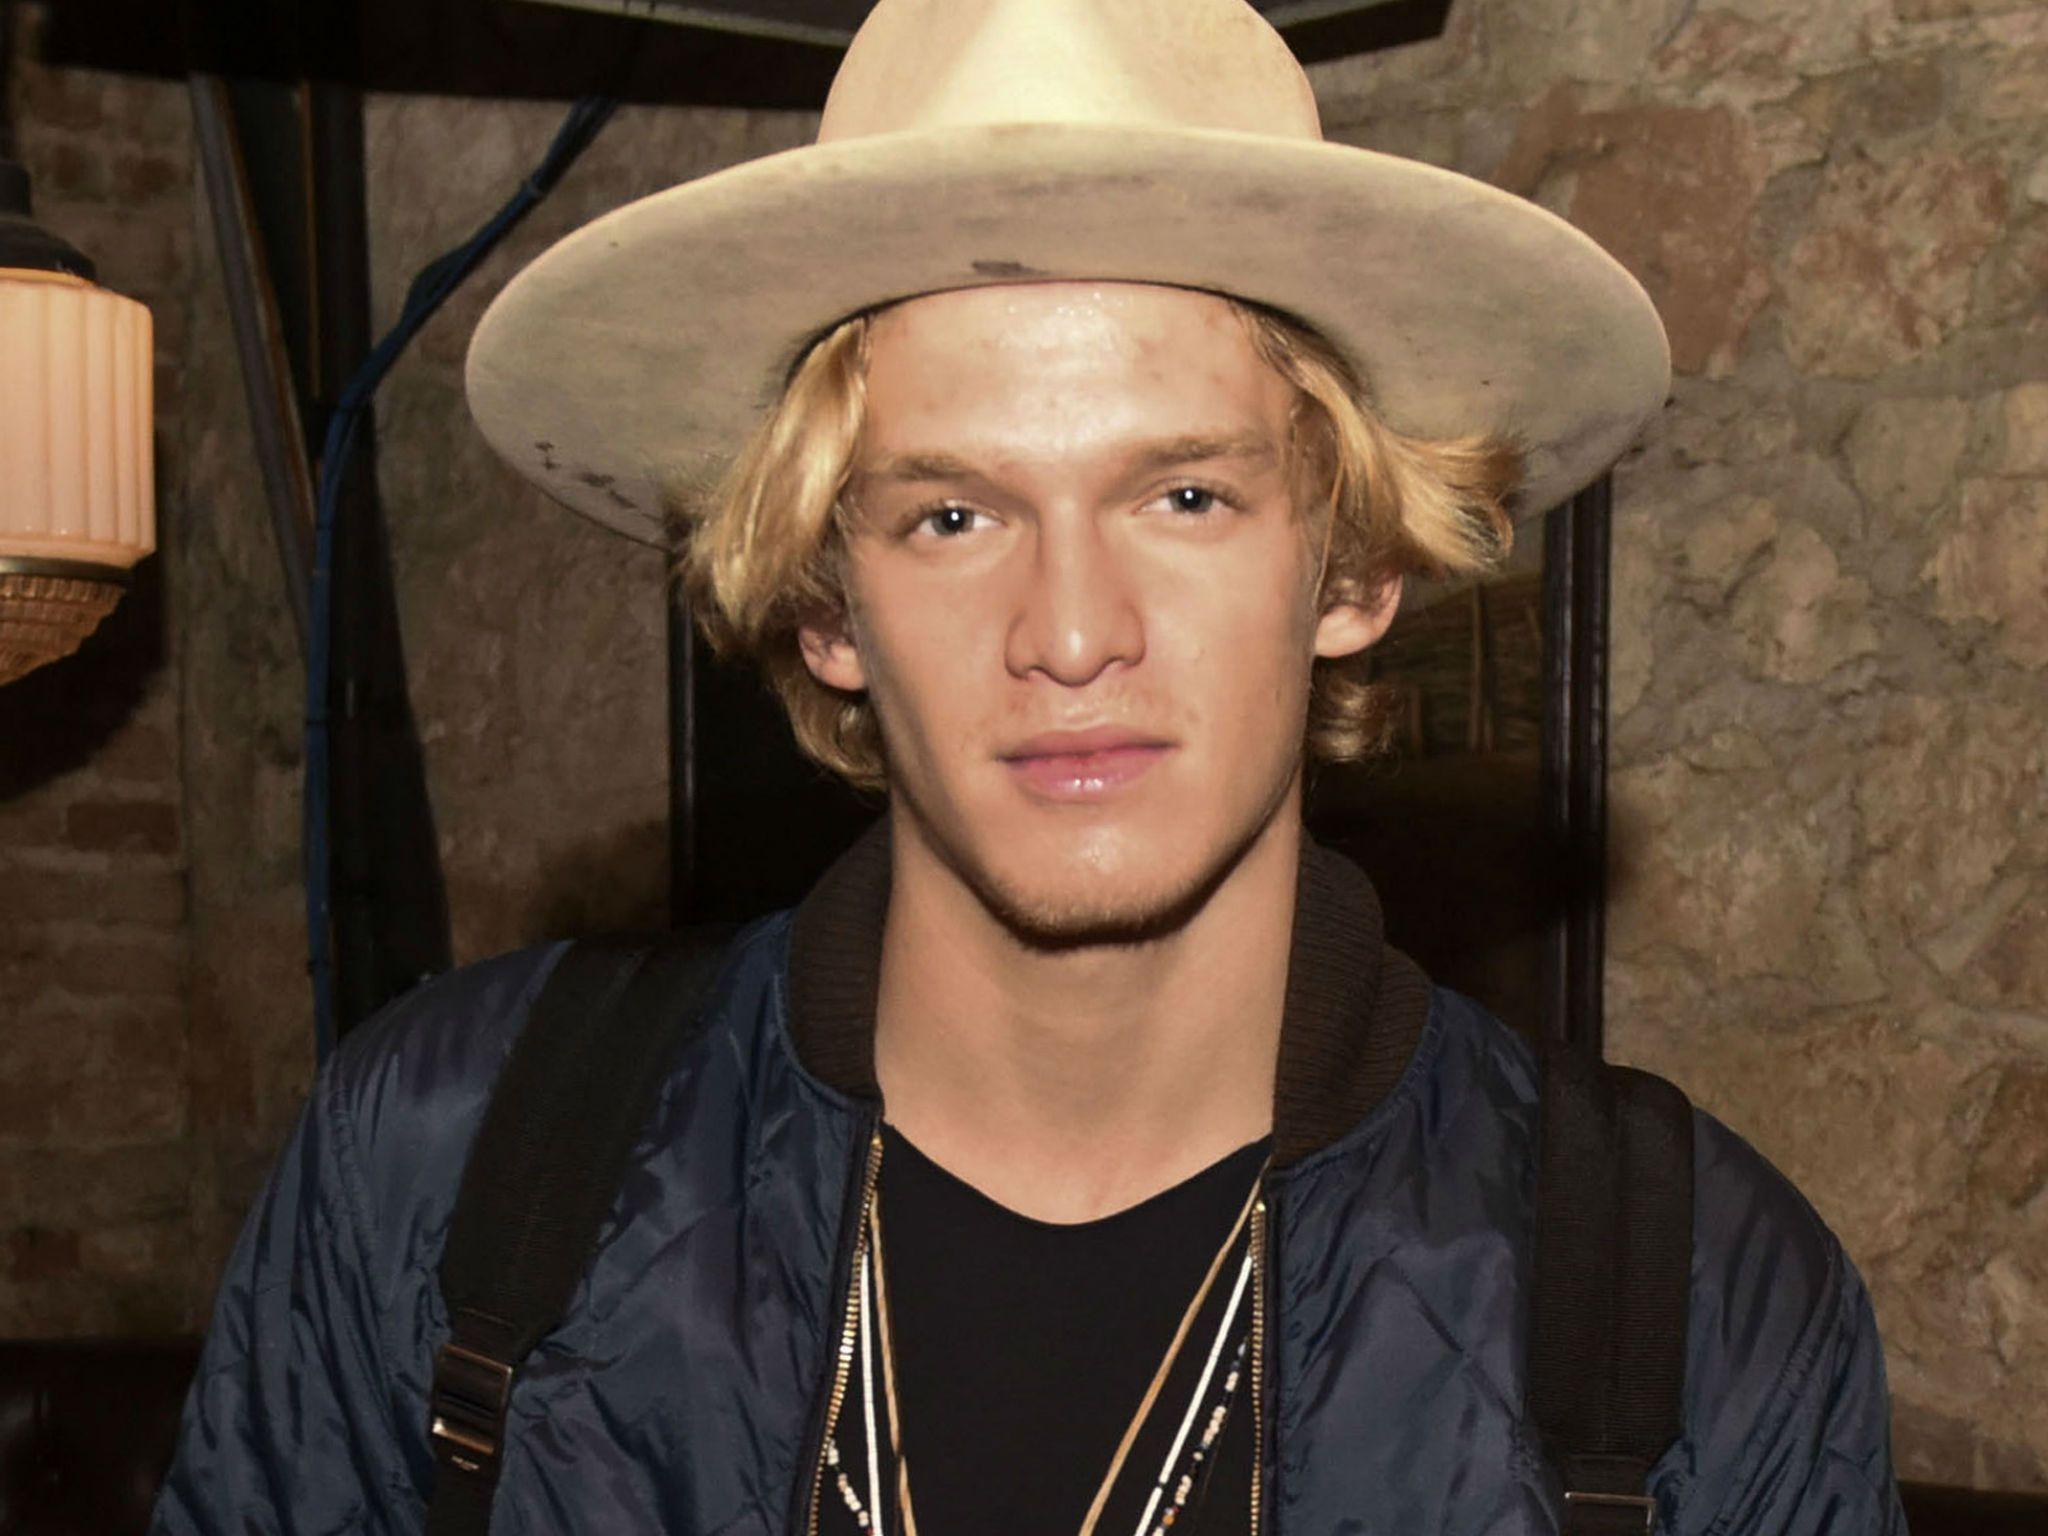 Cody Simpson donates his Twitter account to a Syrian refugee